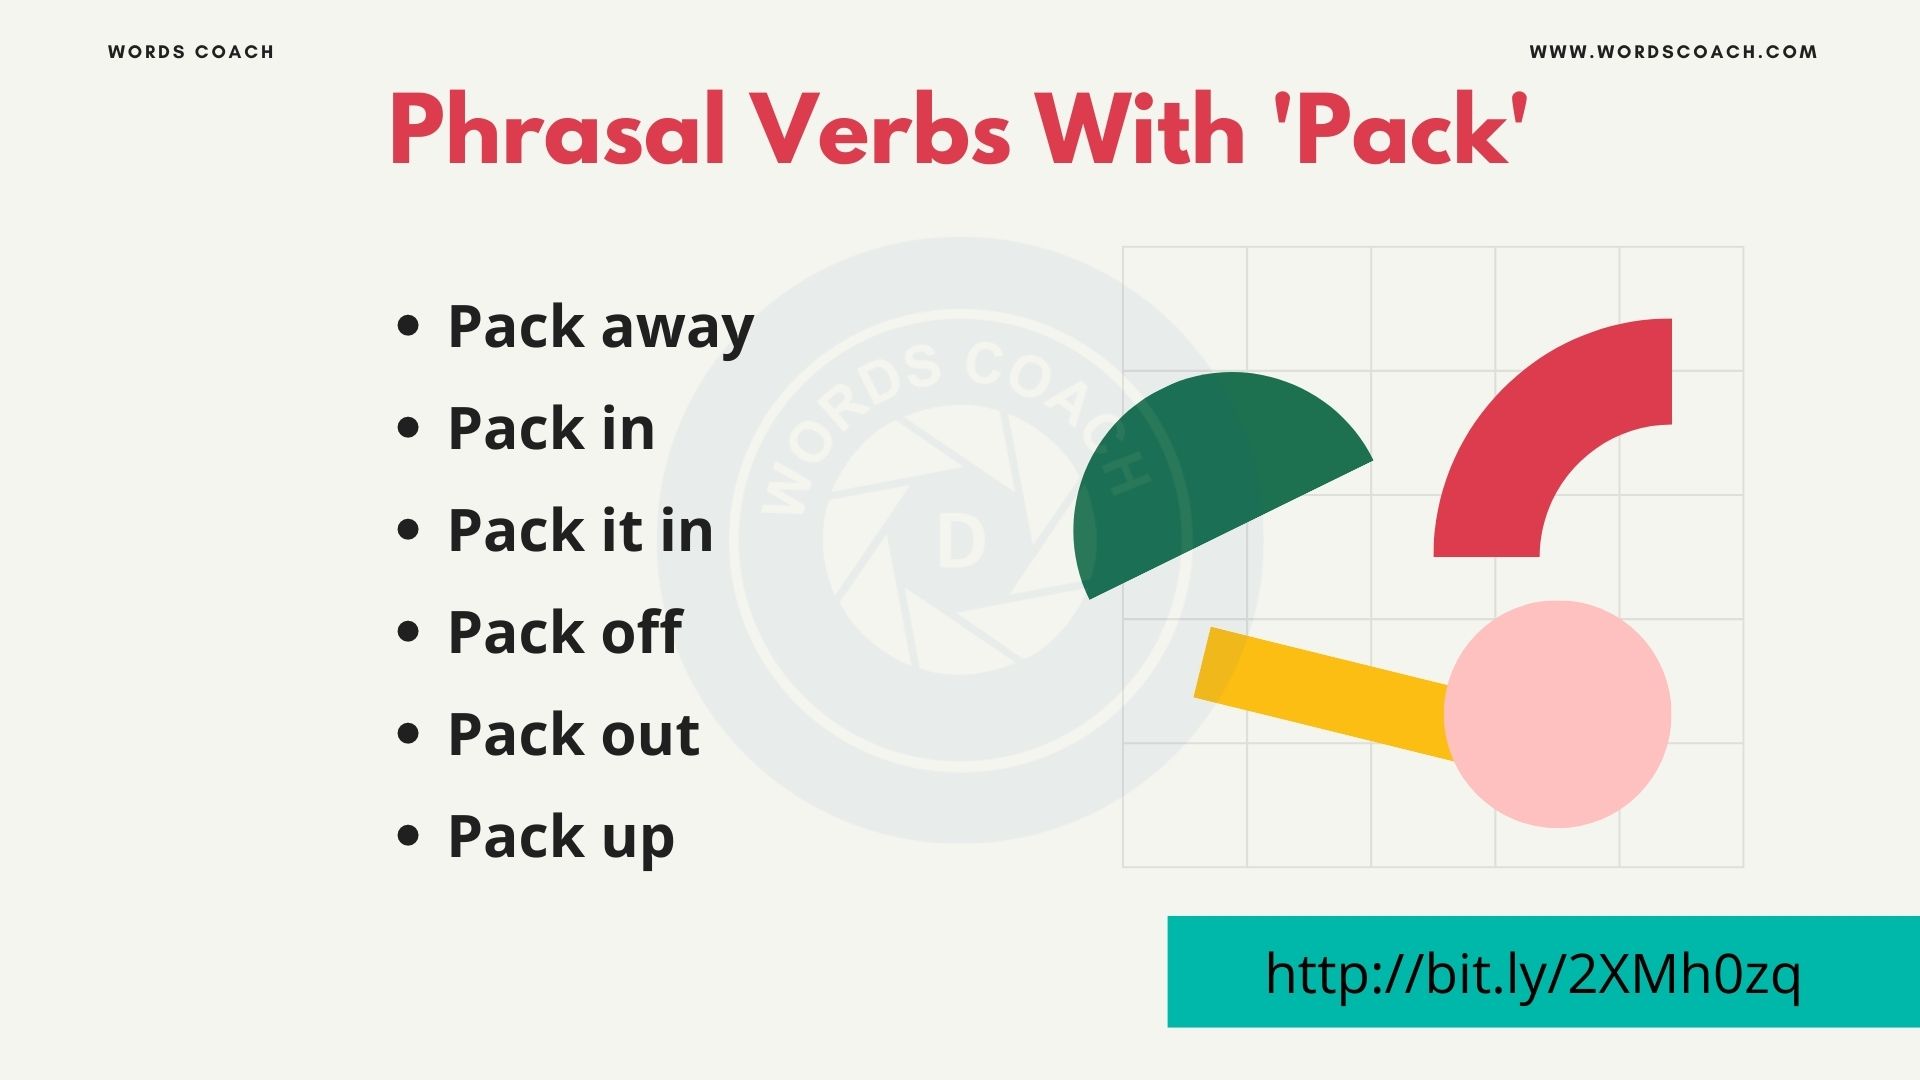 Phrasal Verbs With 'Pack' - wordscoach.com